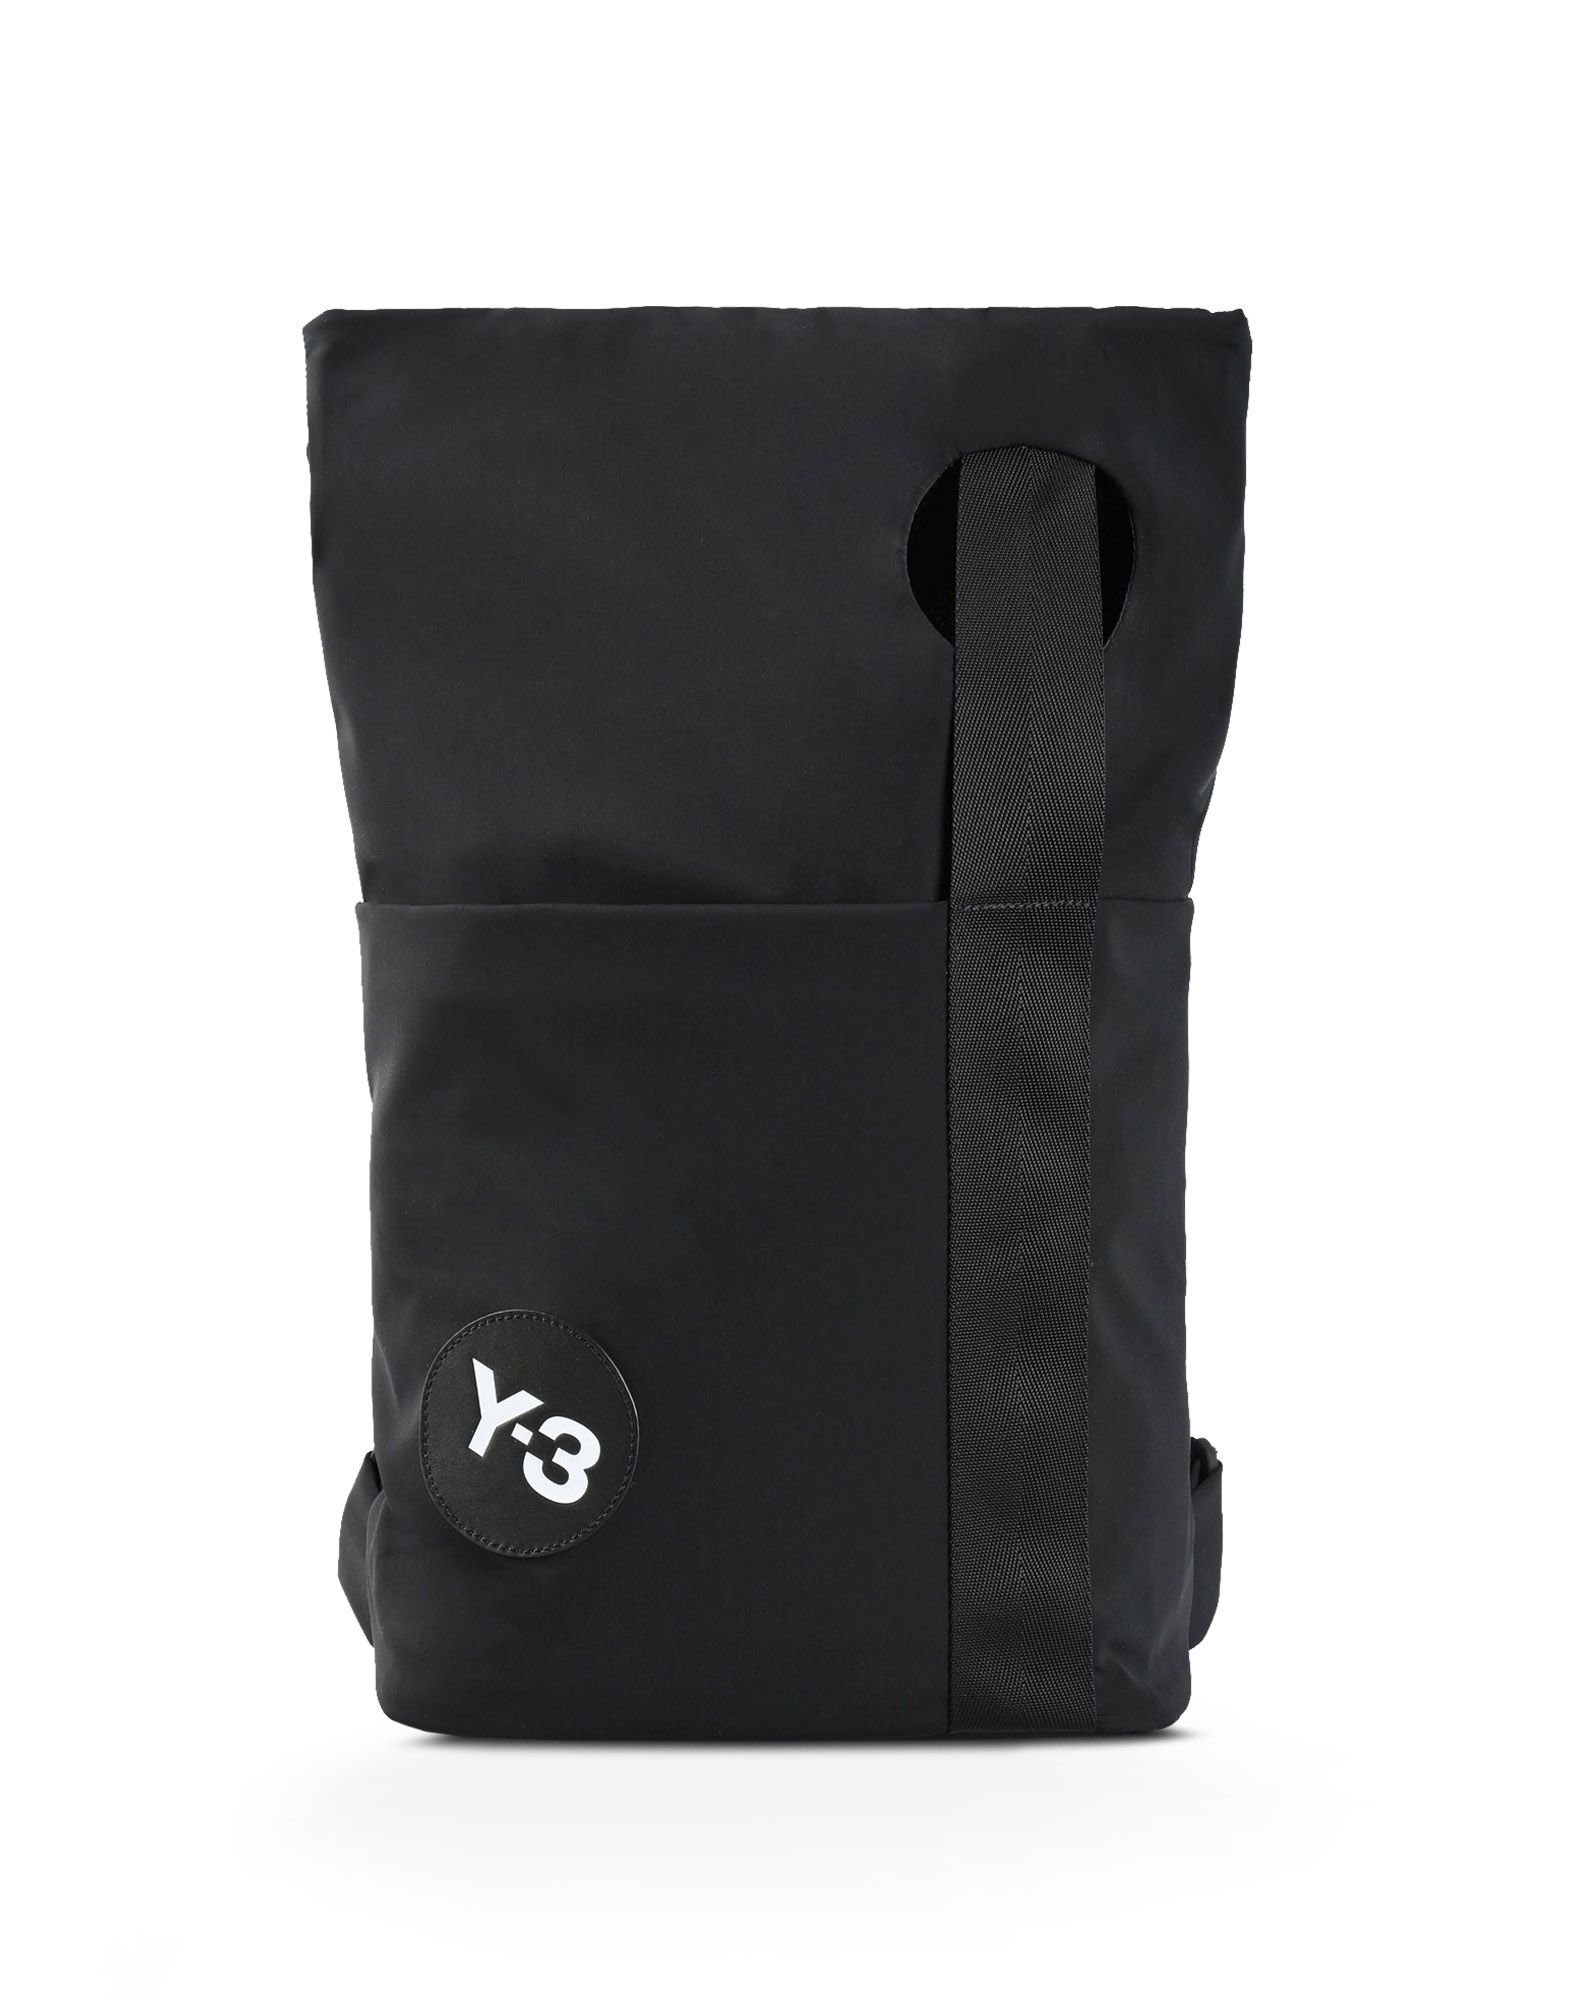 Y 3 BACKPACK for Women | Adidas Y-3 Official Store